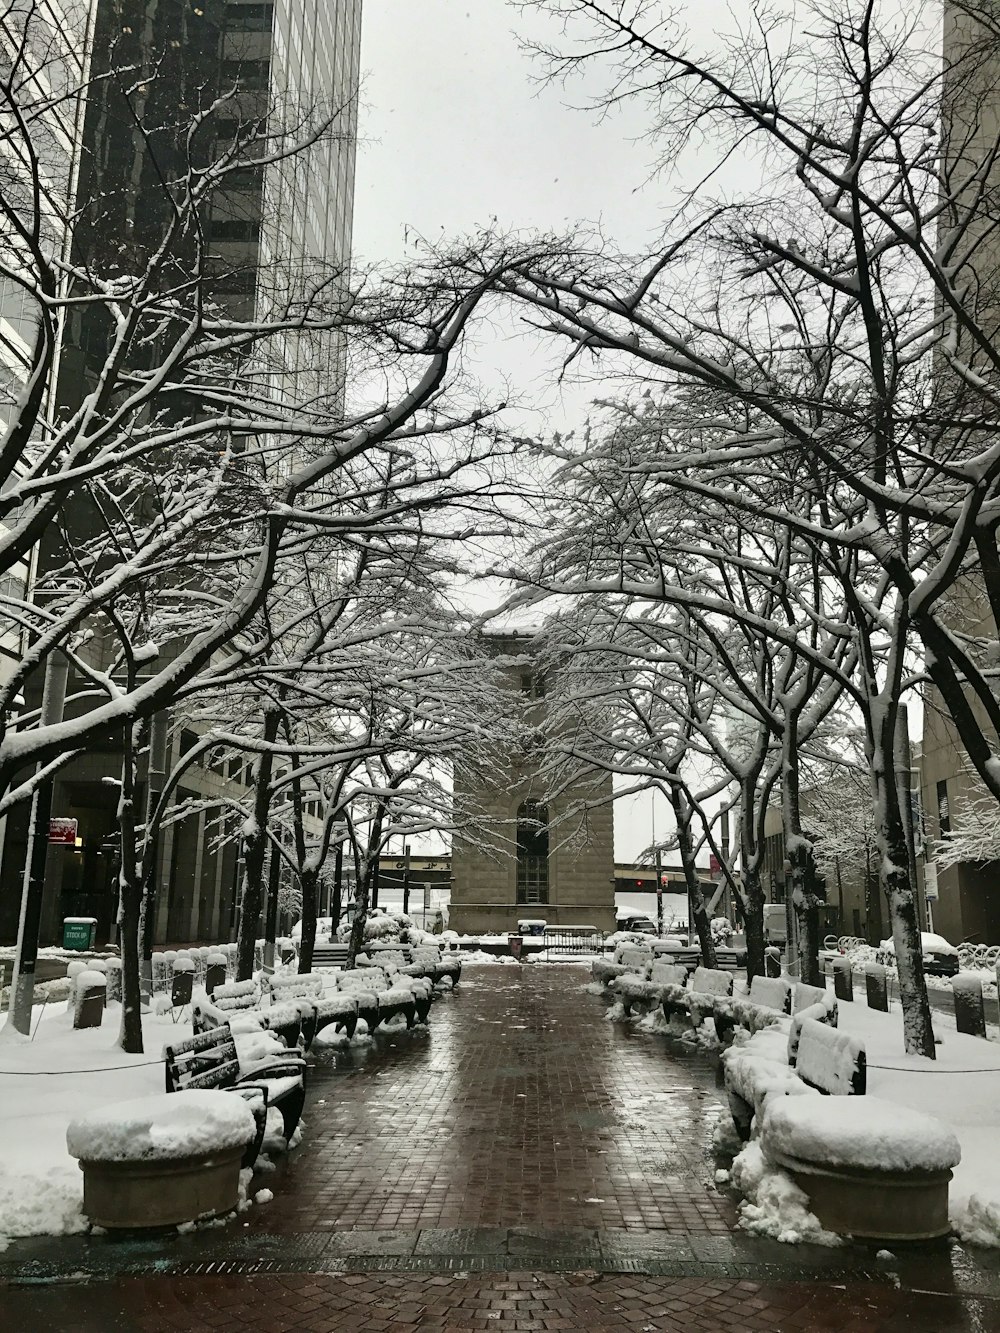 a wet street with snow on the ground and trees on the side